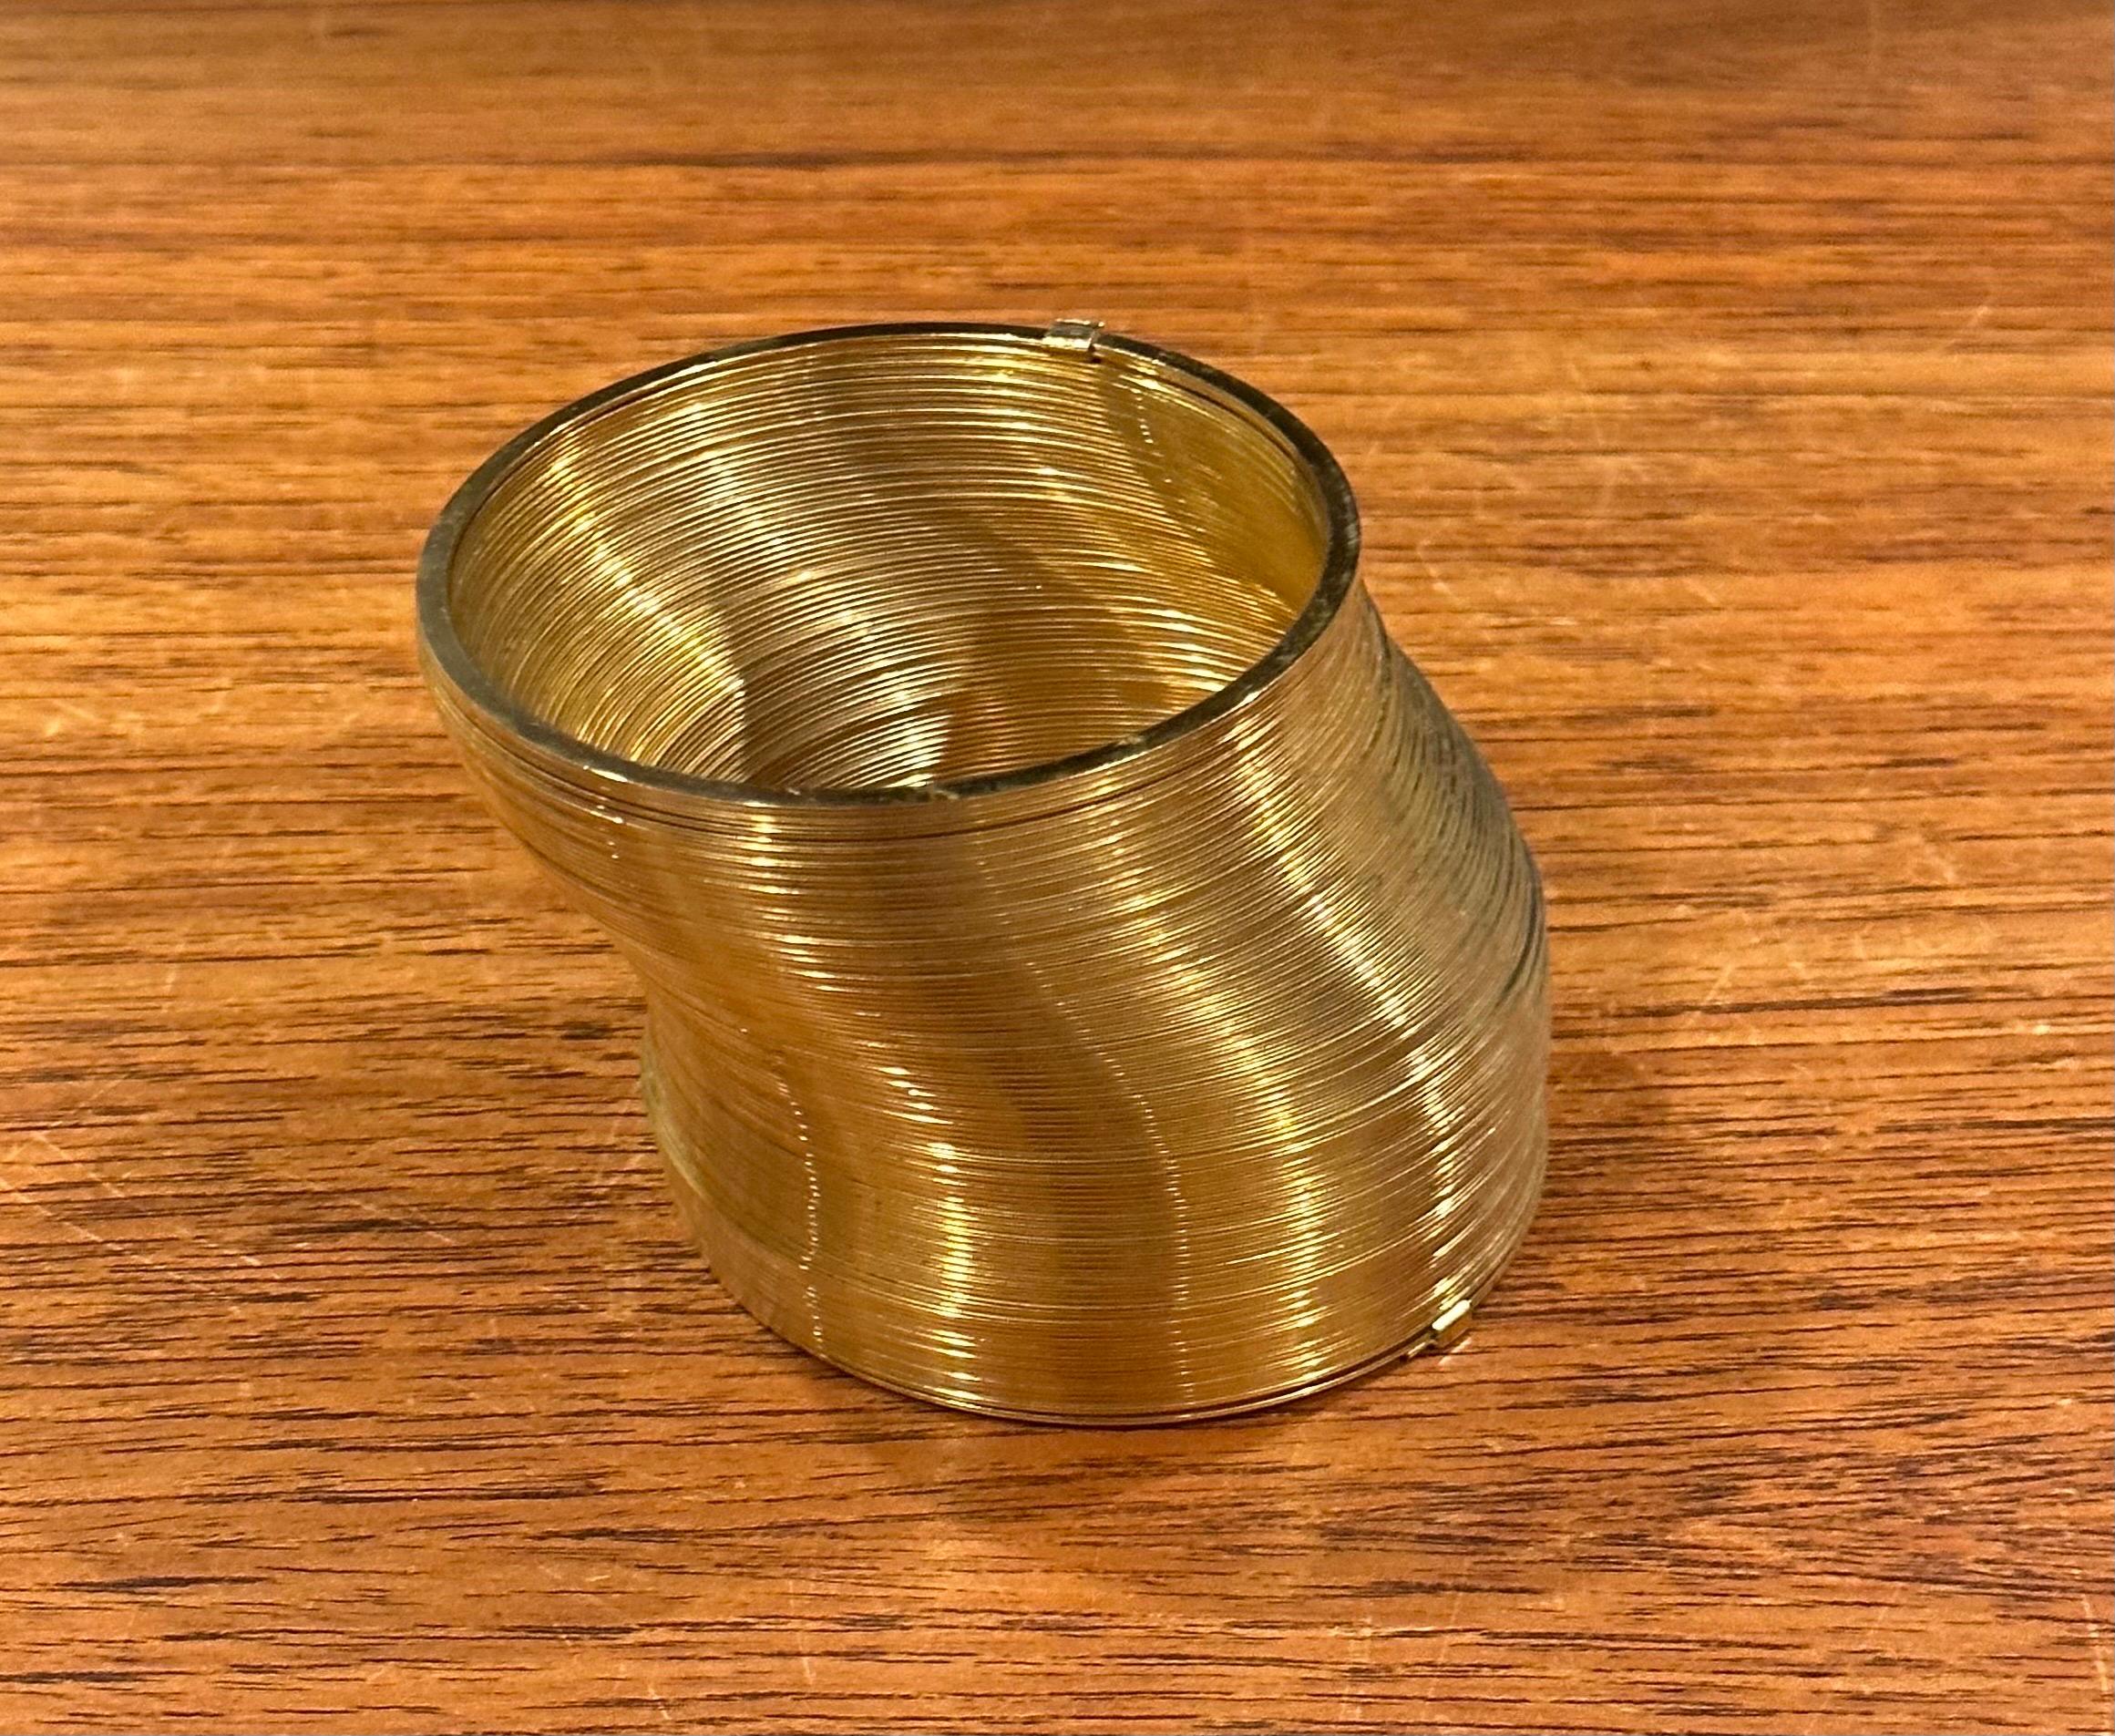 50th Anniversary Gold-Plated Slinky Toy in Wood Box In Good Condition For Sale In San Diego, CA